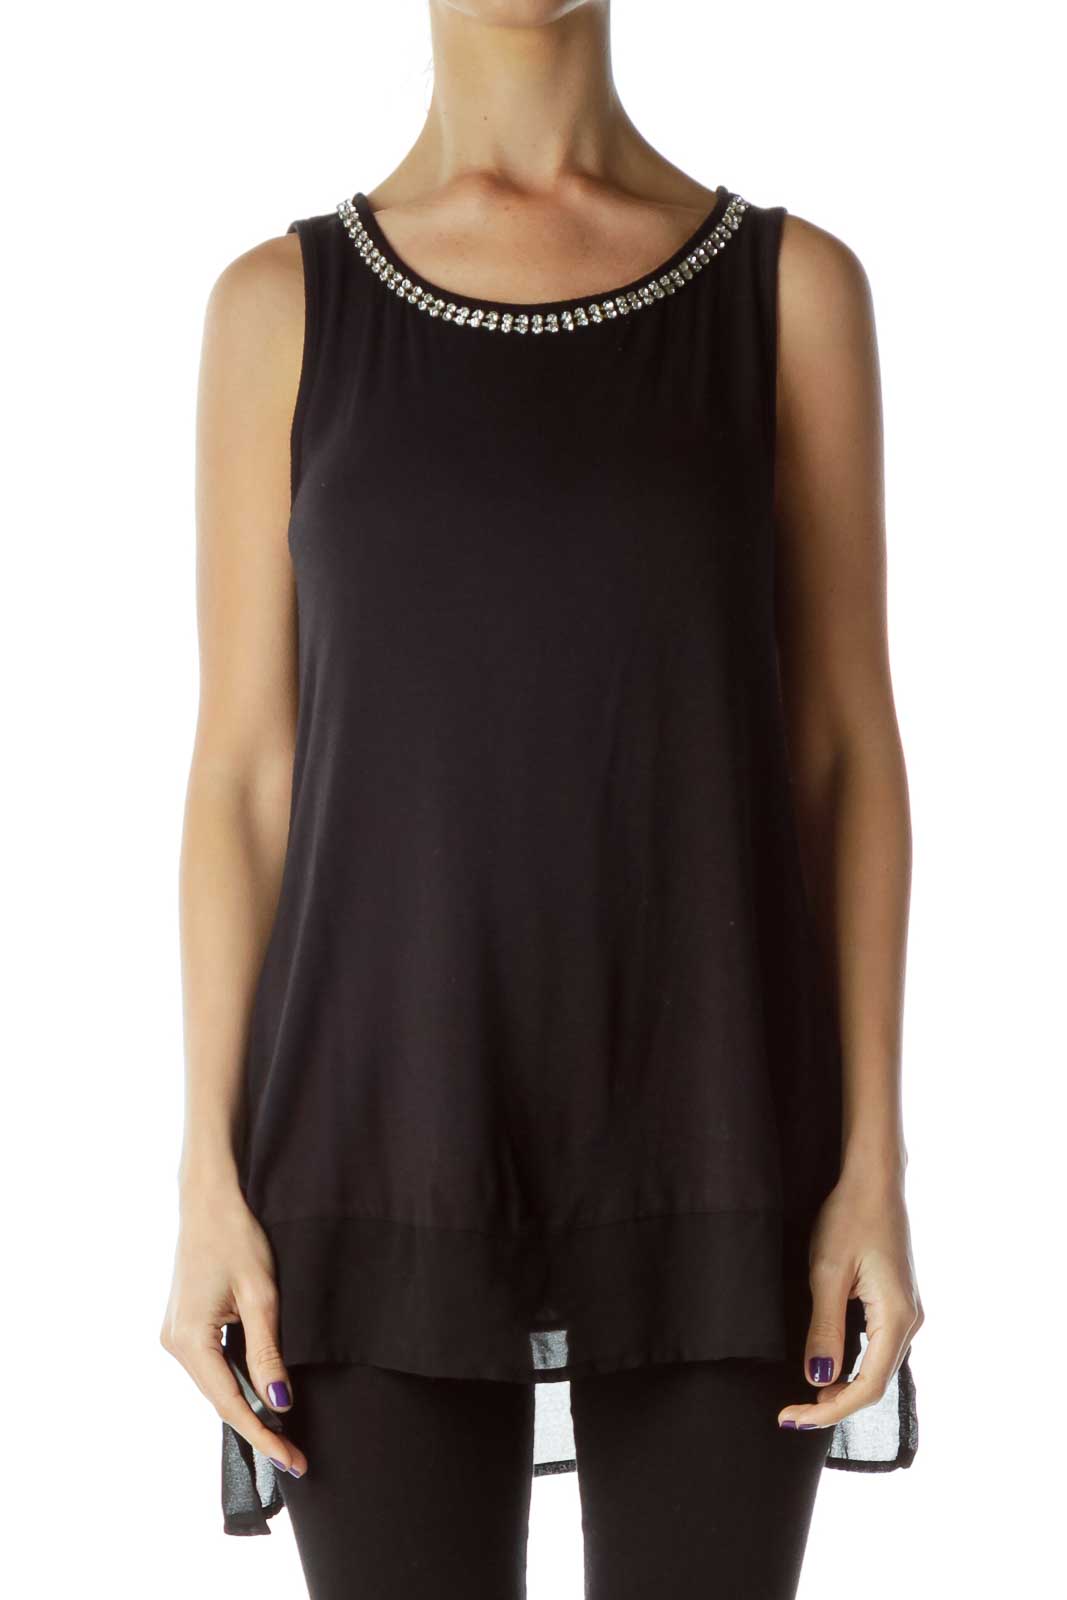 Black Tank with Bejeweled Neckline Front